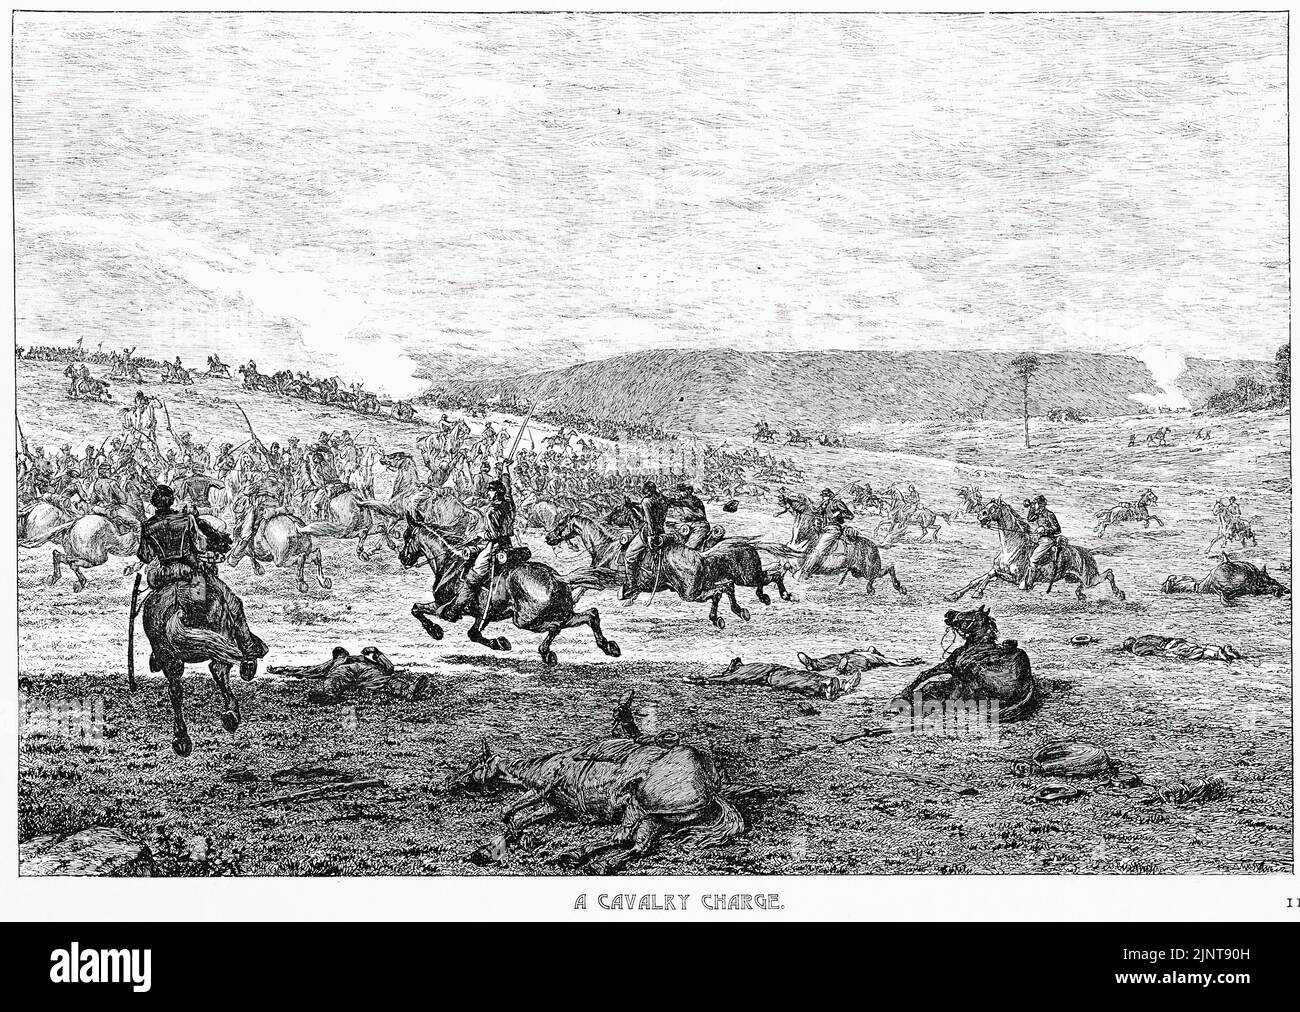 A Cavalry Charge. 19th century American Civil War illustration by Edwin Forbes Stock Photo